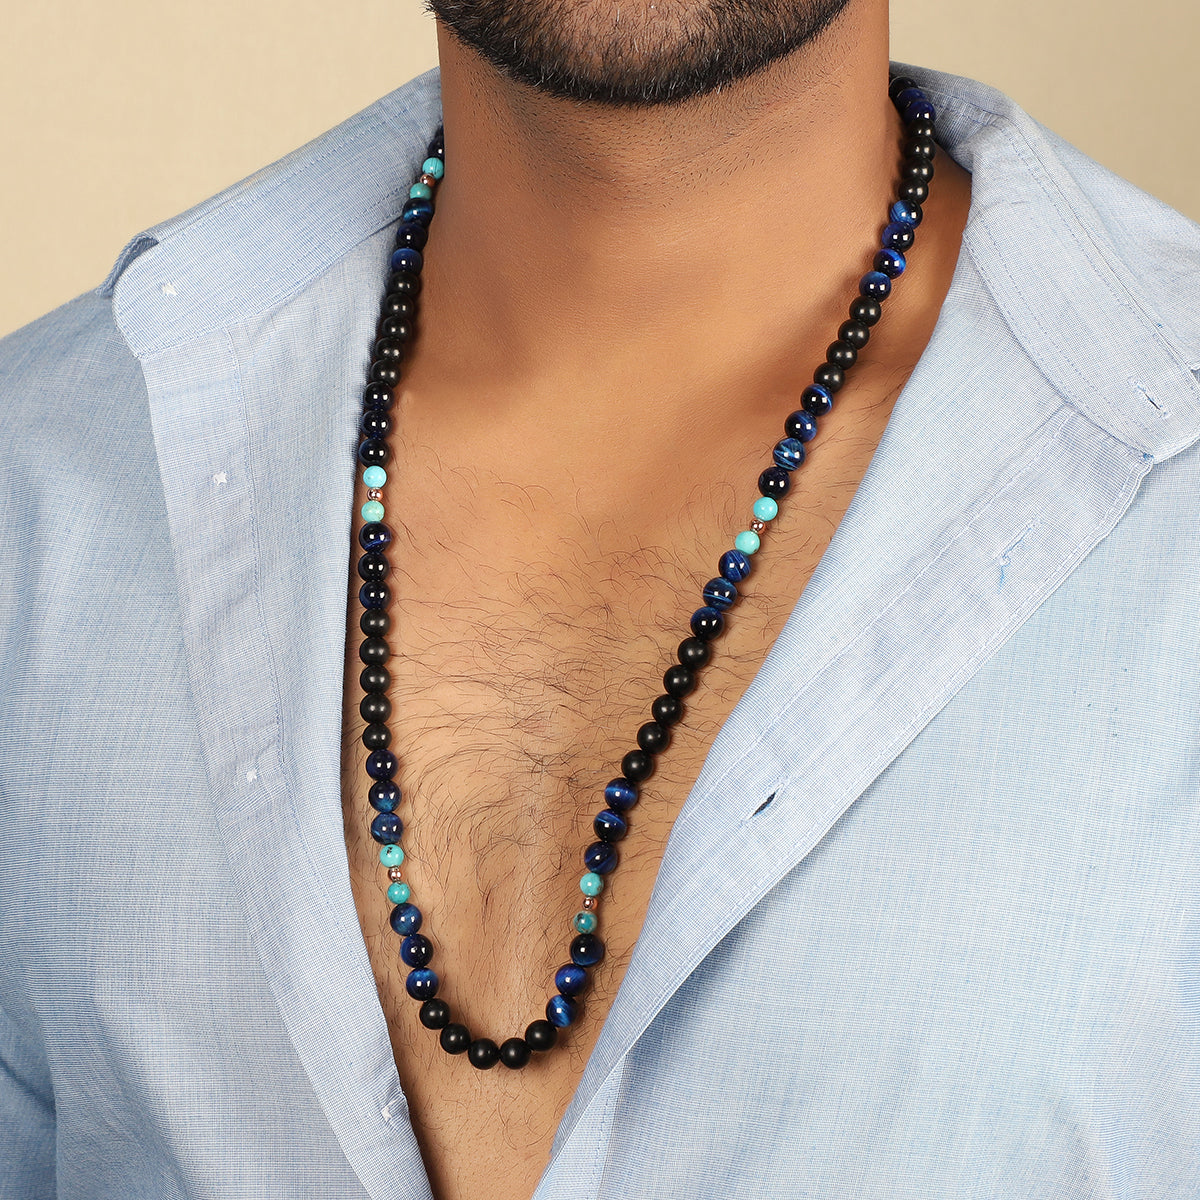 Men's Ball Chain Necklace with Tiger's Eye Beads – LynnToddDesigns